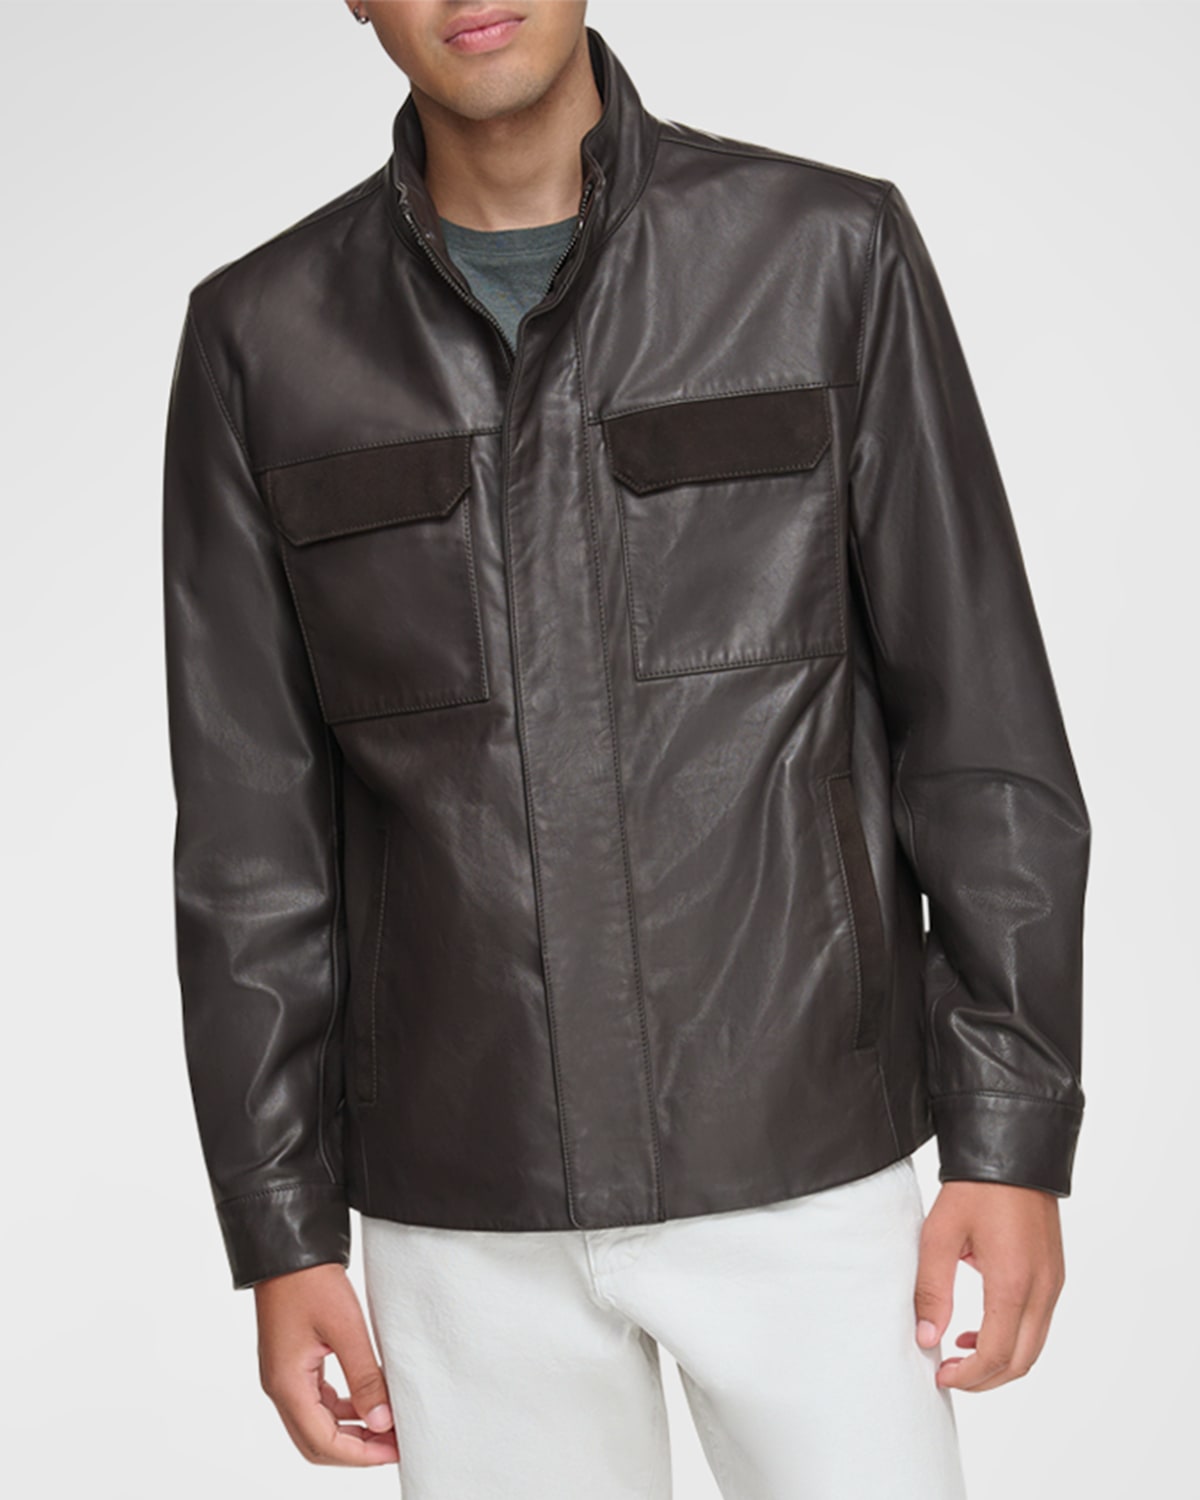 ANDREW MARC MEN'S VENLO LEATHER JACKET WITH SUEDE TRIM